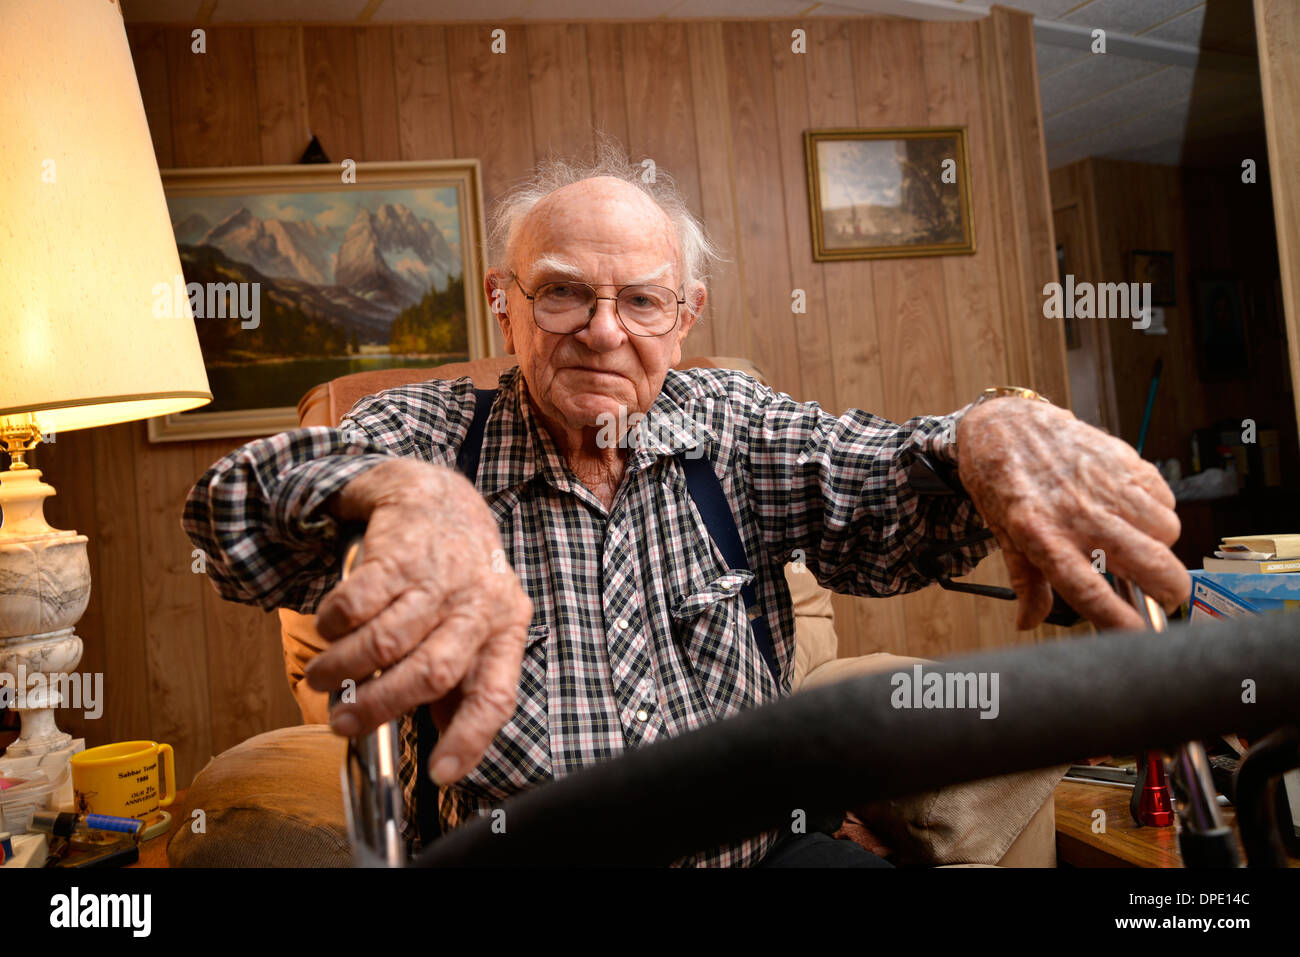 A 93-year-old man at his home. Stock Photo